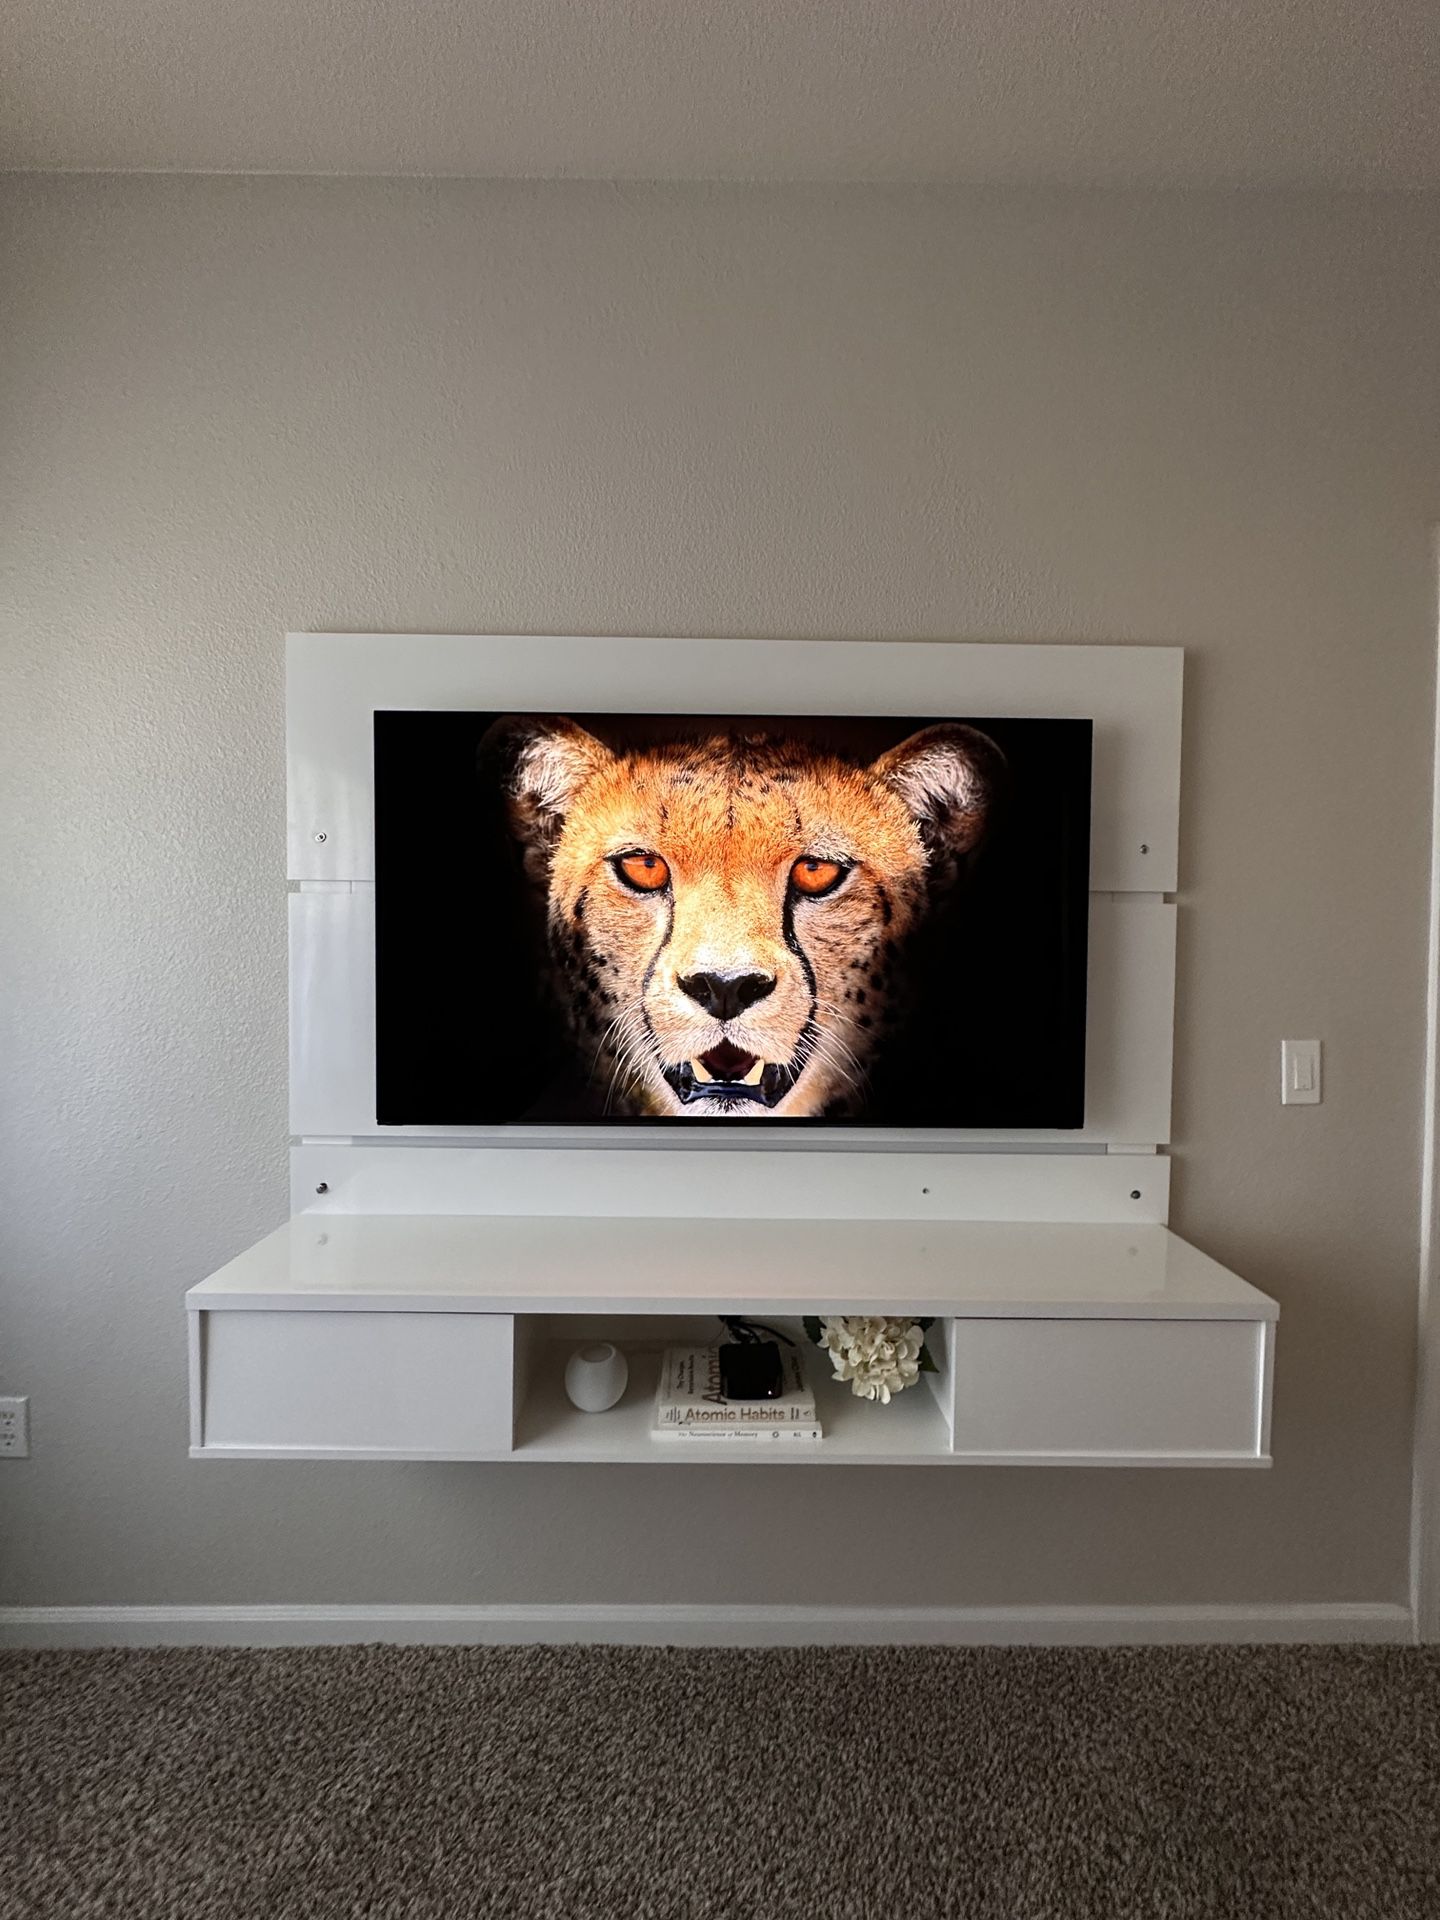 $3000 Sony master series OLED TV, Hardly Used, 55 inch bundle with Apple TV 4K, Apple HomePod Mini, and entertainment center